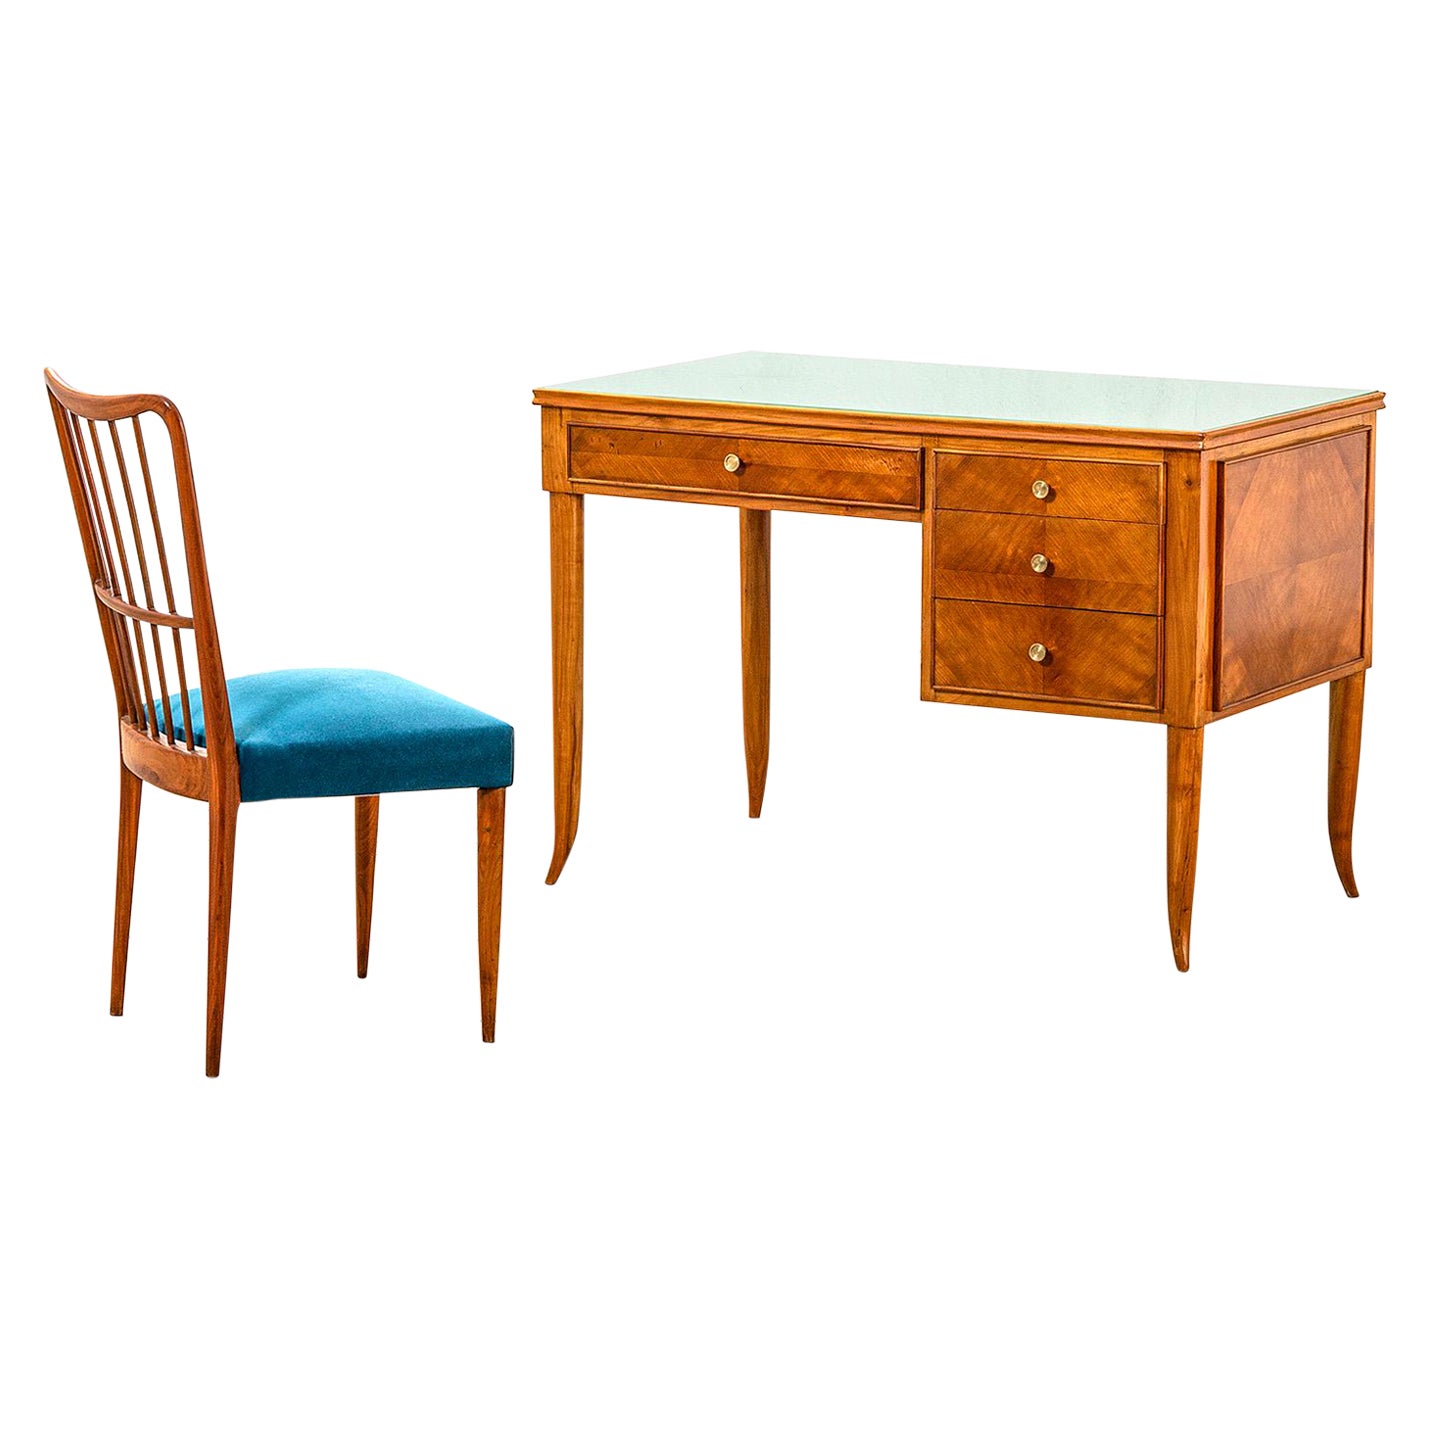 20th Century Paolo Buffa Desk and Chair in Wood for Lietti, 50s For Sale